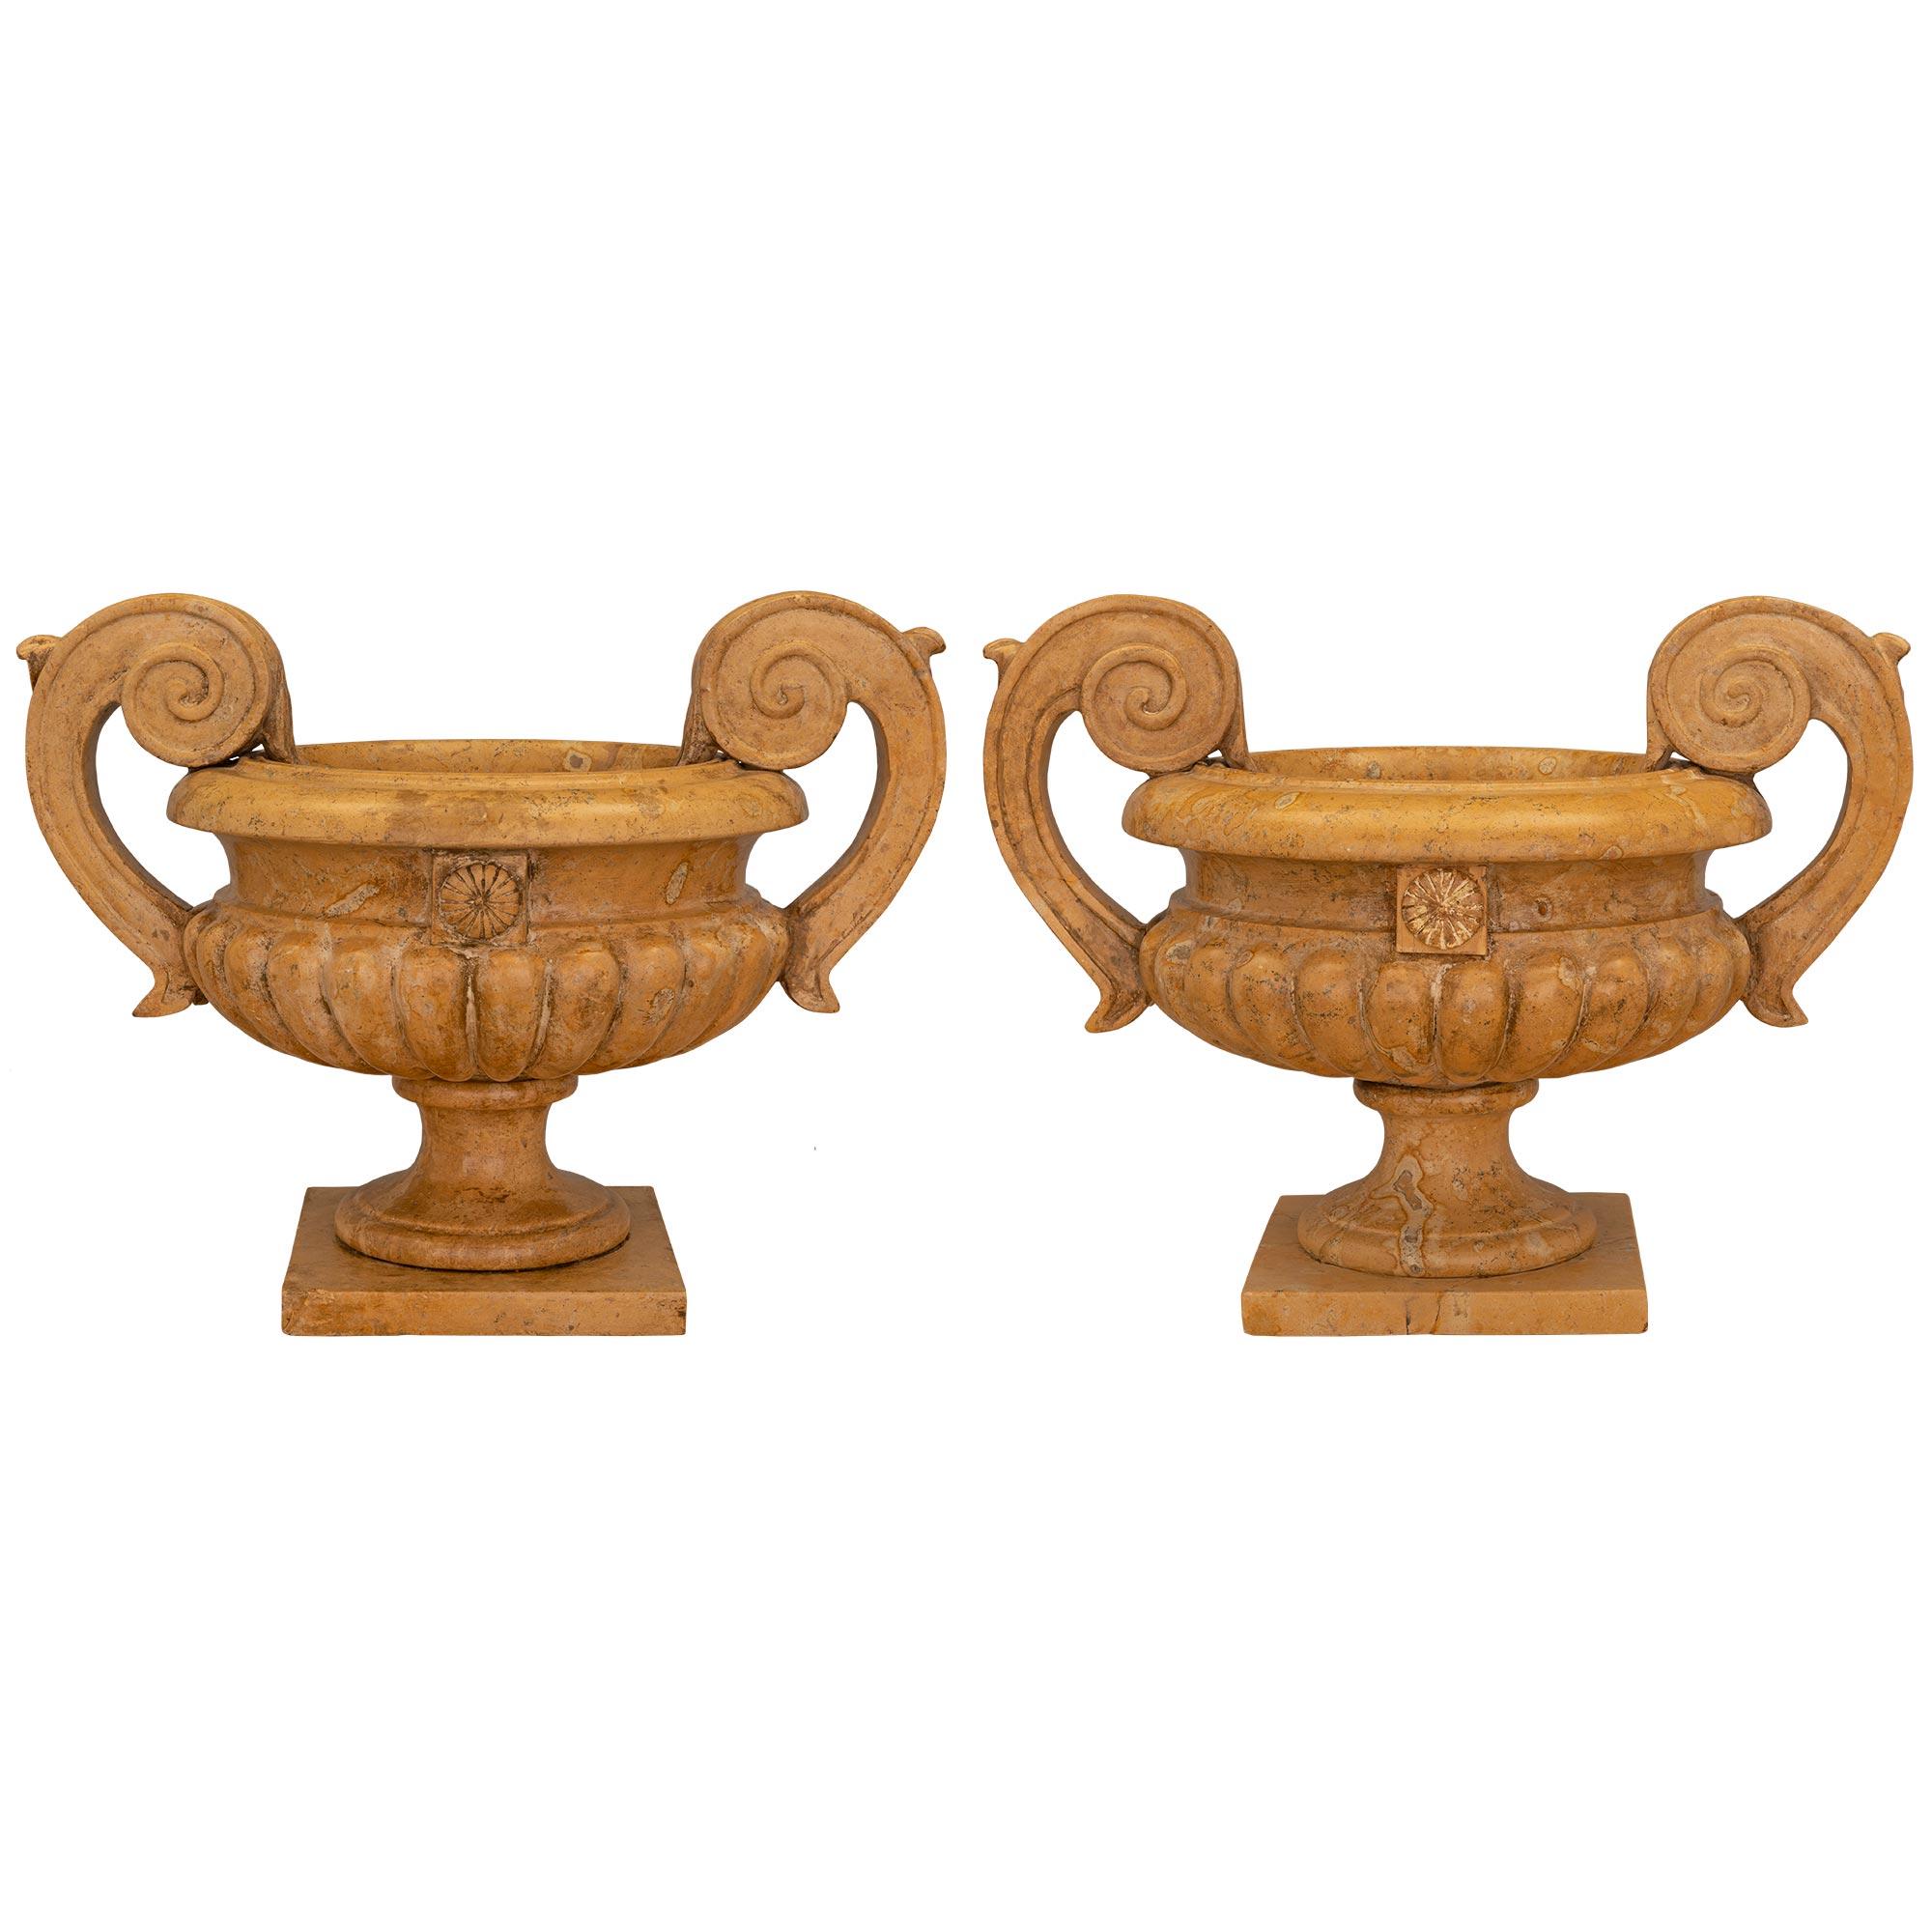 Pair of Italian 19th Century Sienna Marble Urns In Good Condition For Sale In West Palm Beach, FL